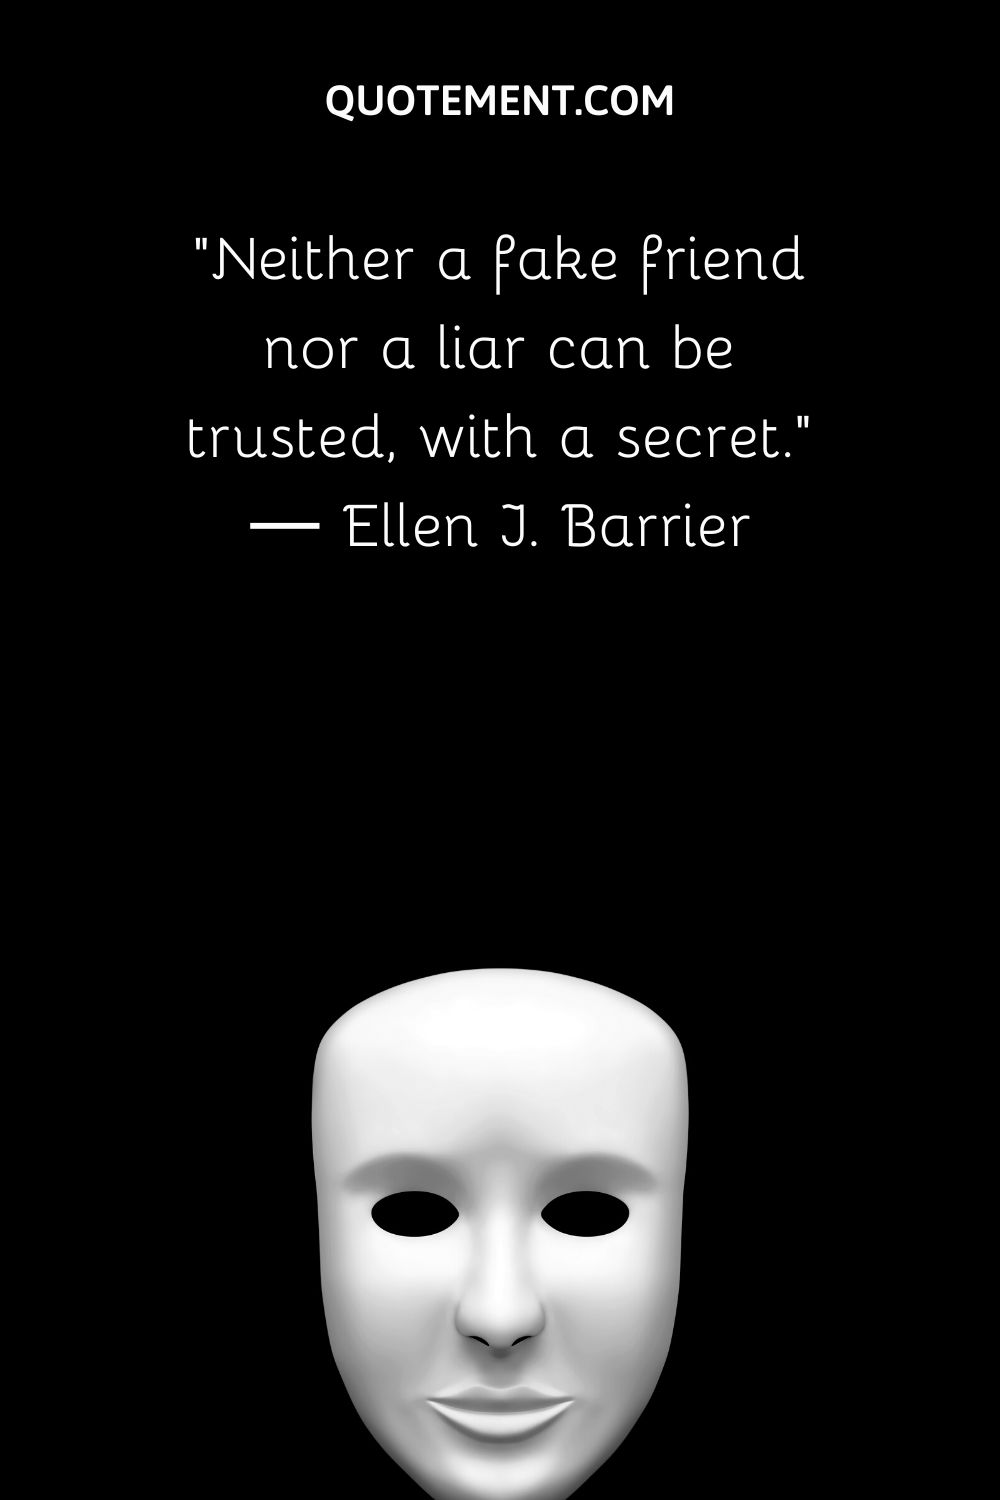 Neither a fake friend nor a liar can be trusted, with a secret